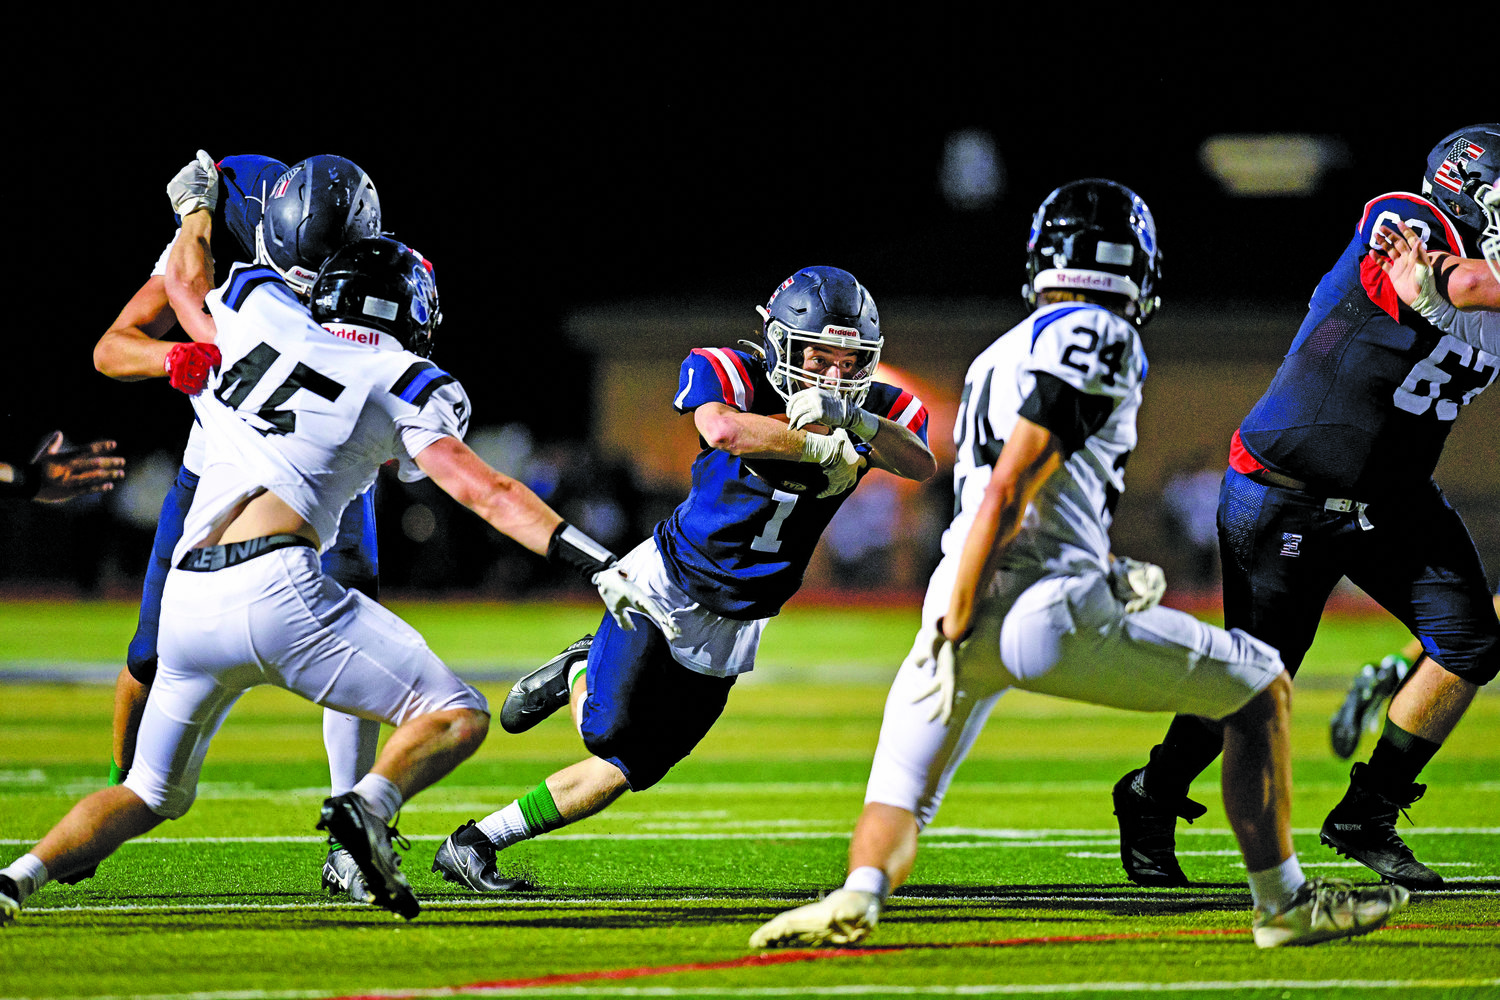 CB East’s Declan Kelly slashes through the hole, gaining a first down.